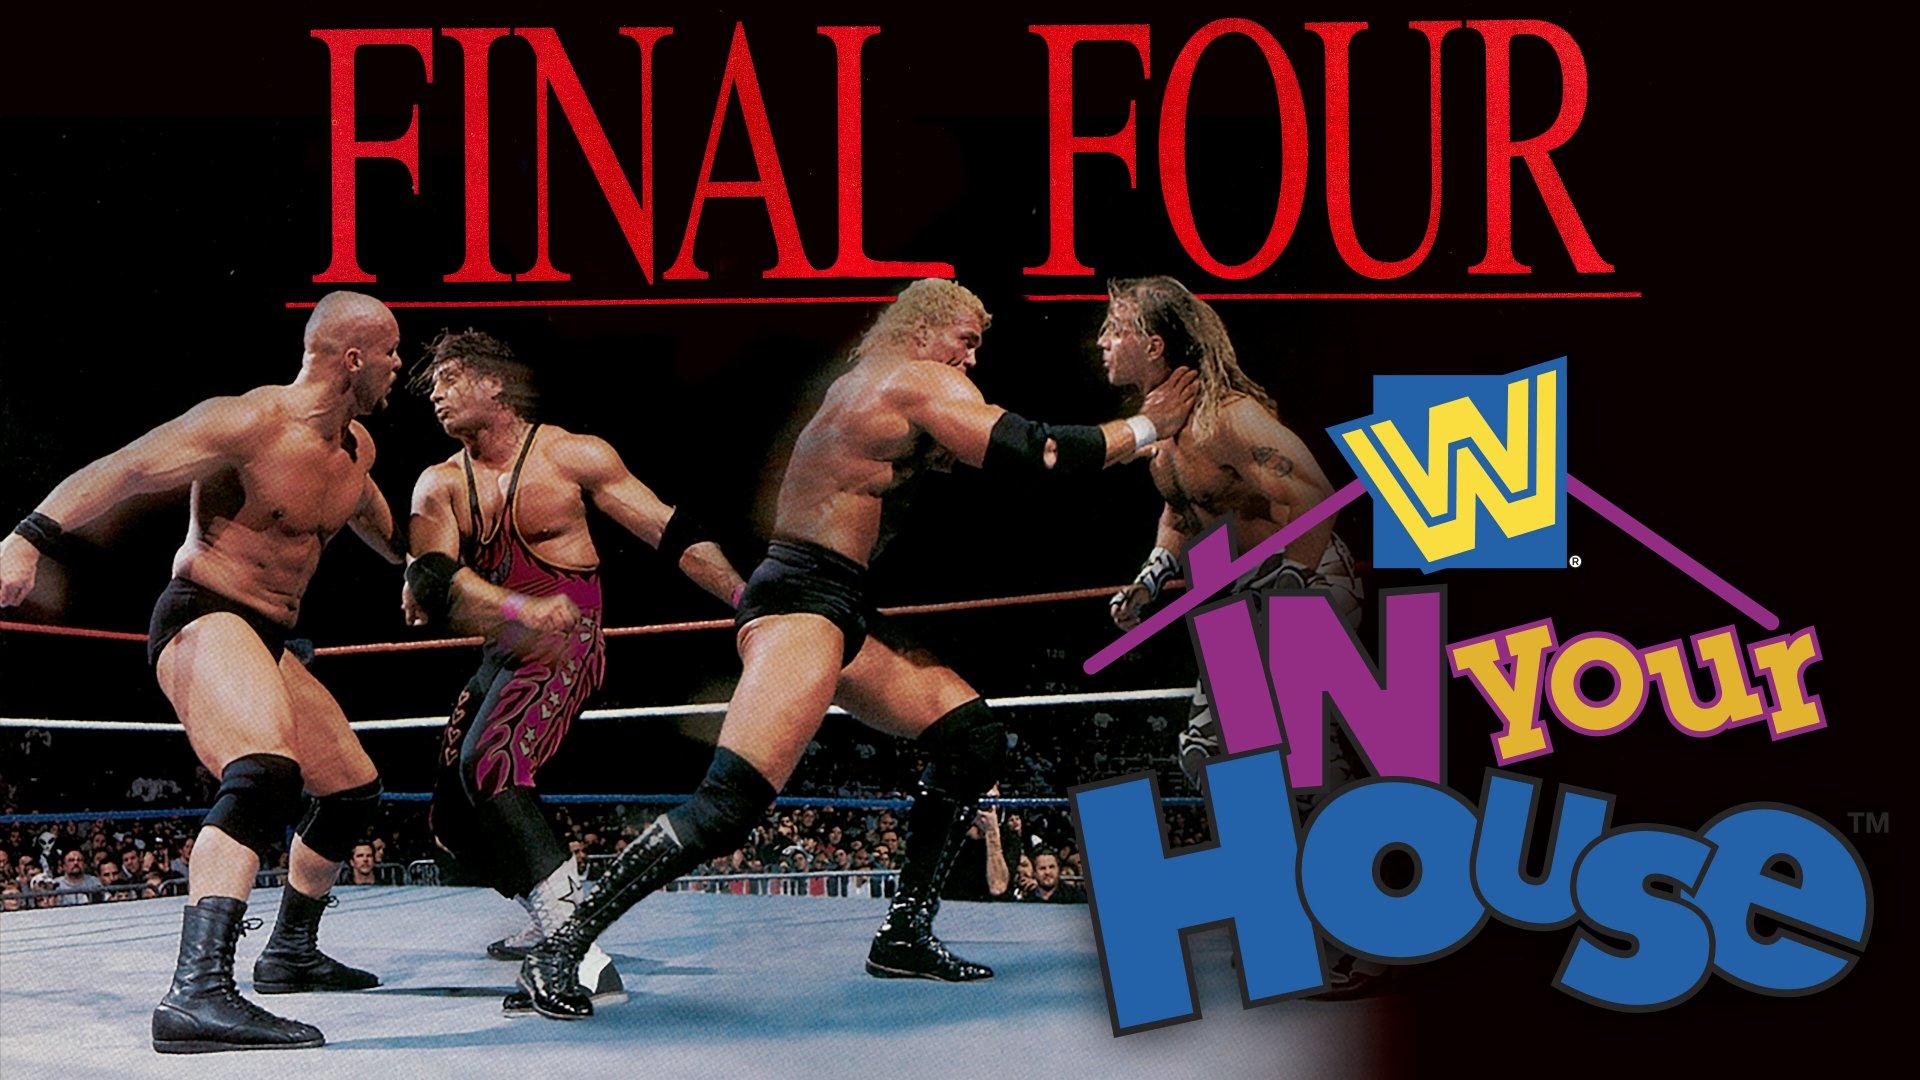 WWE In Your House: Final Four